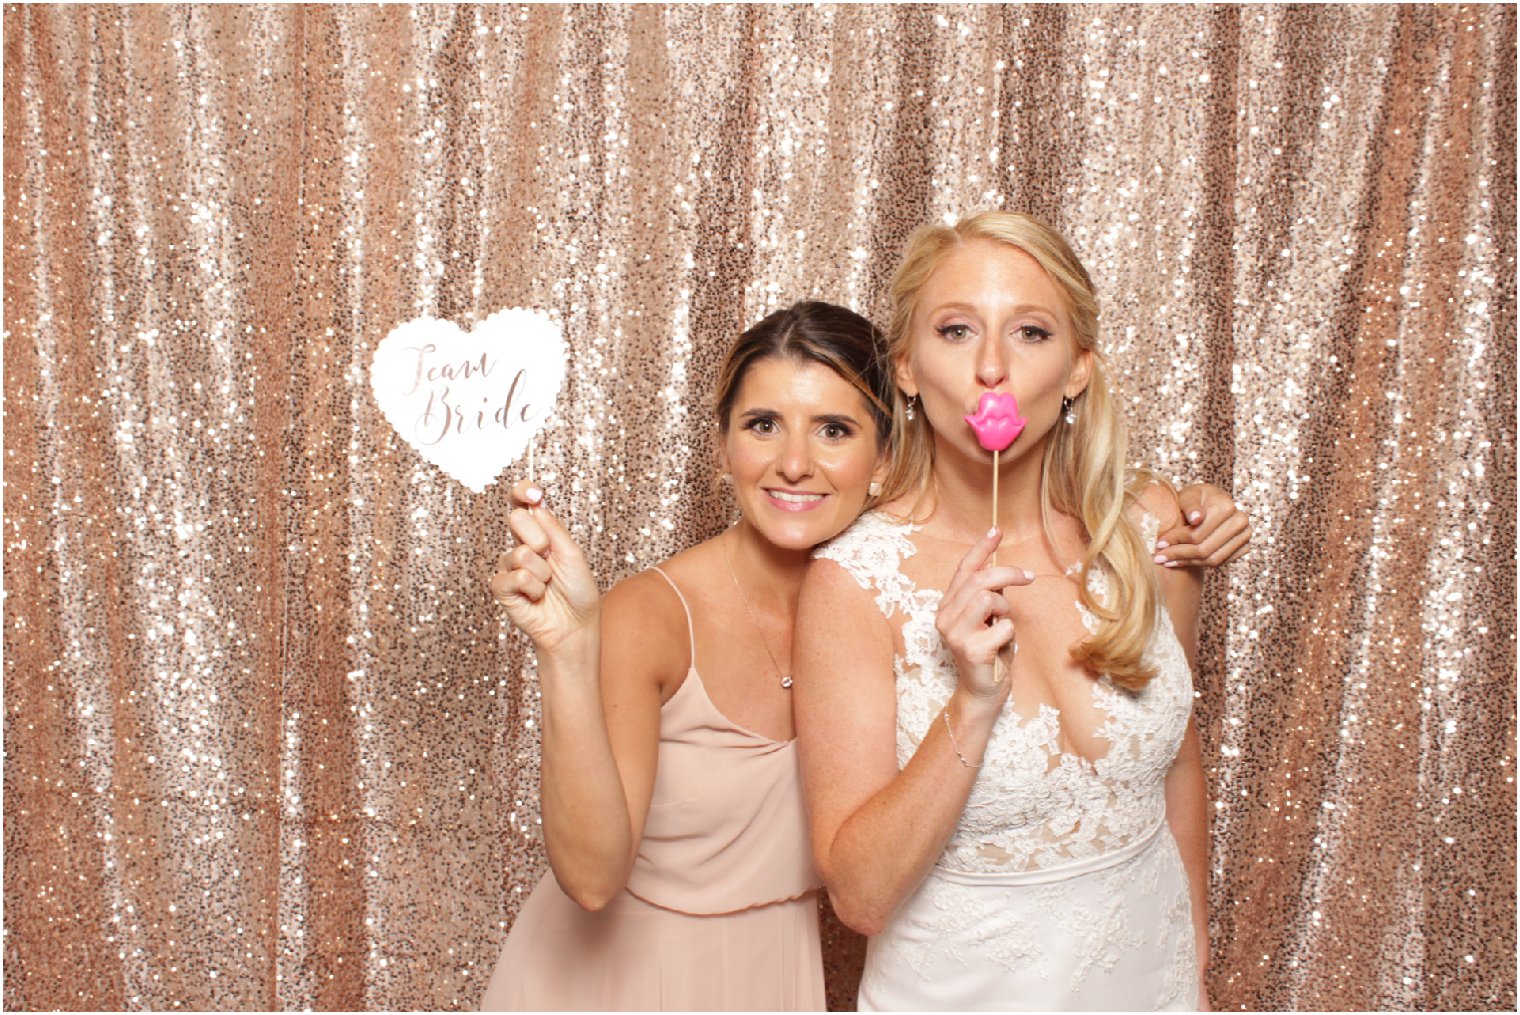 bride and bridesmaid in photo booth